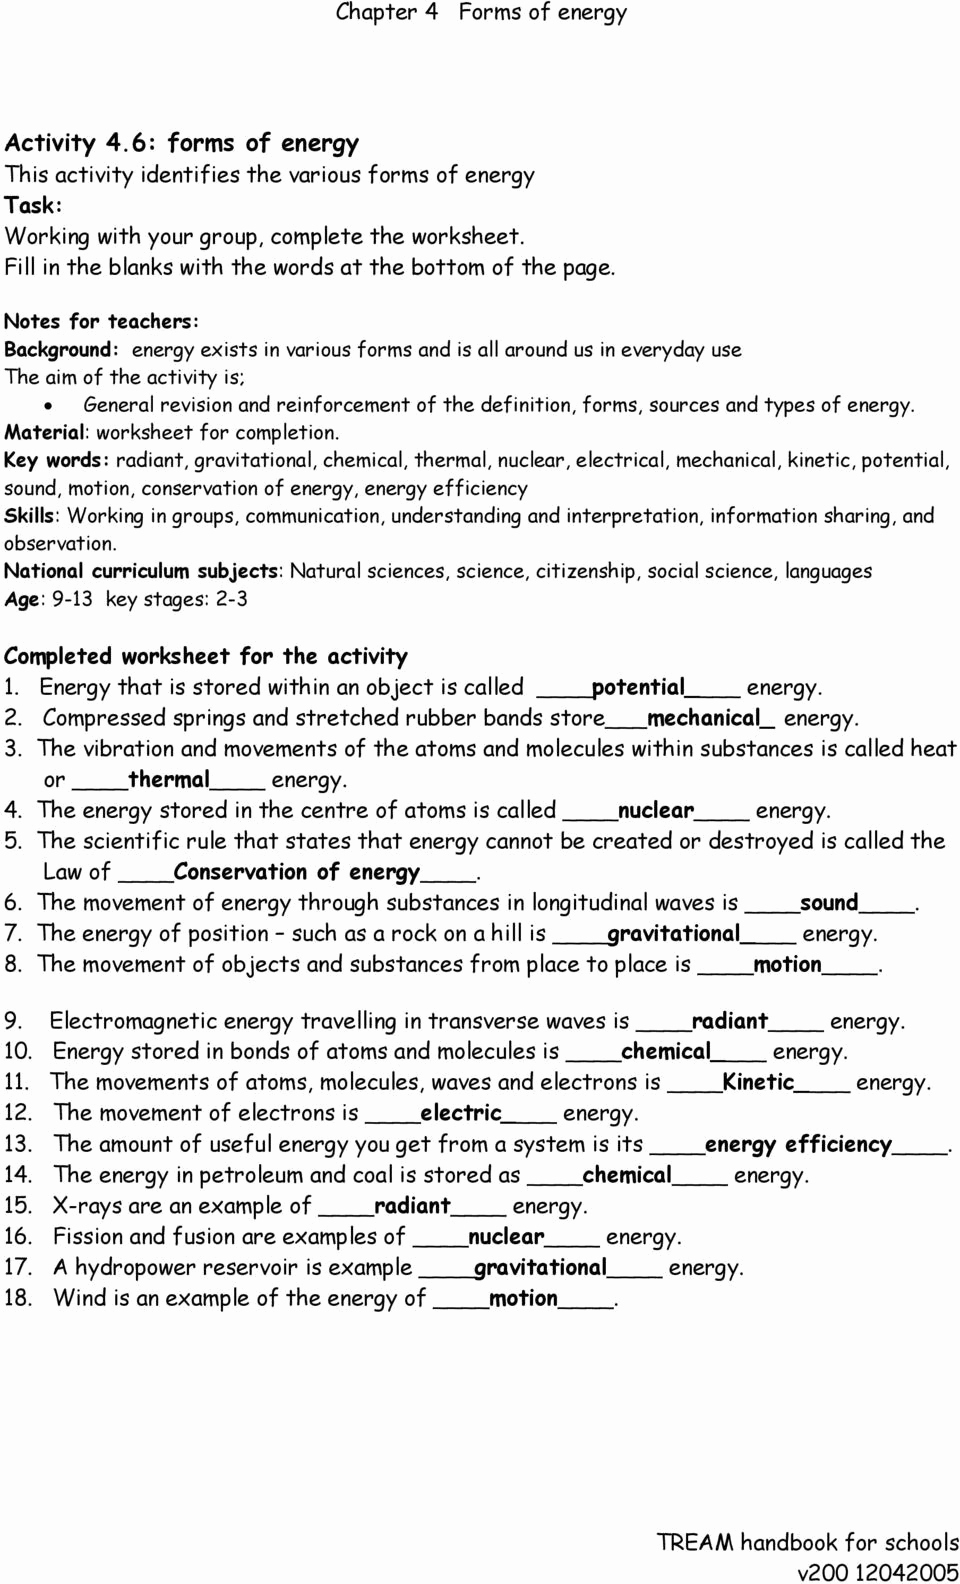 Energy Worksheets Middle School Pdf Best Of Conservation Energy Worksheet Answers Chapter 4 forms